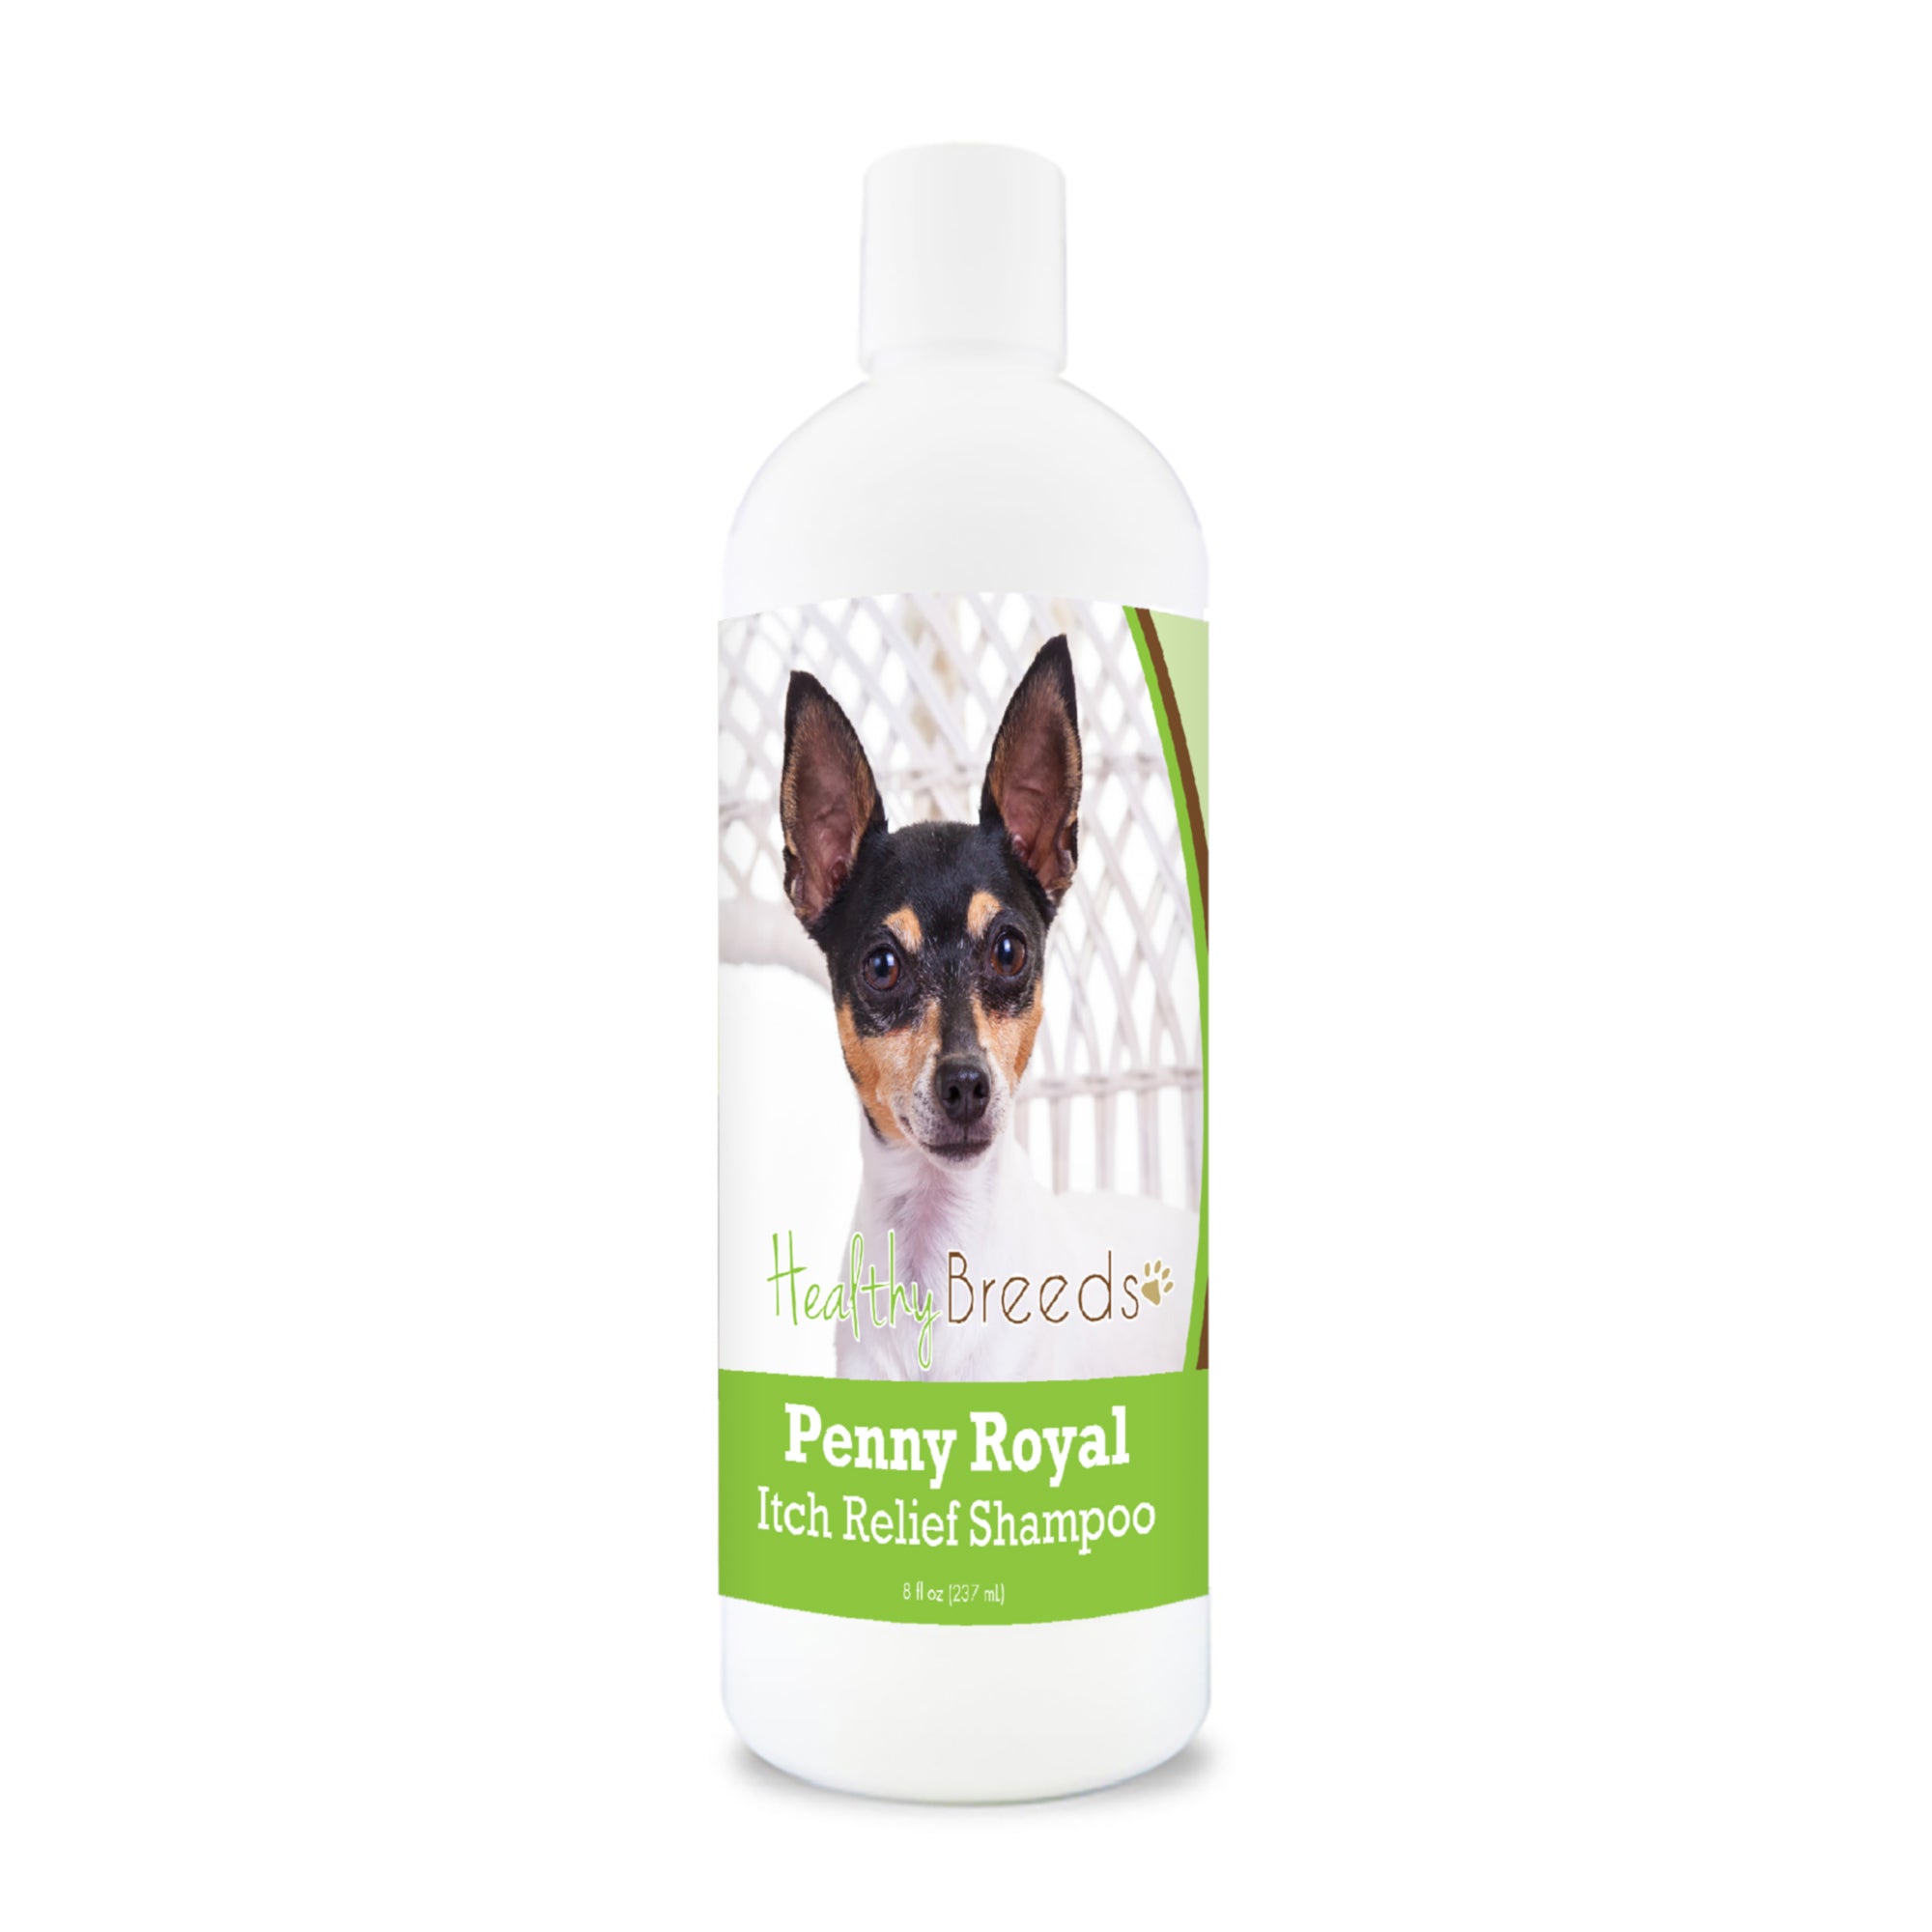 Toy Fox Terrier Penny Royal Itch Relief Shampoo 8 oz